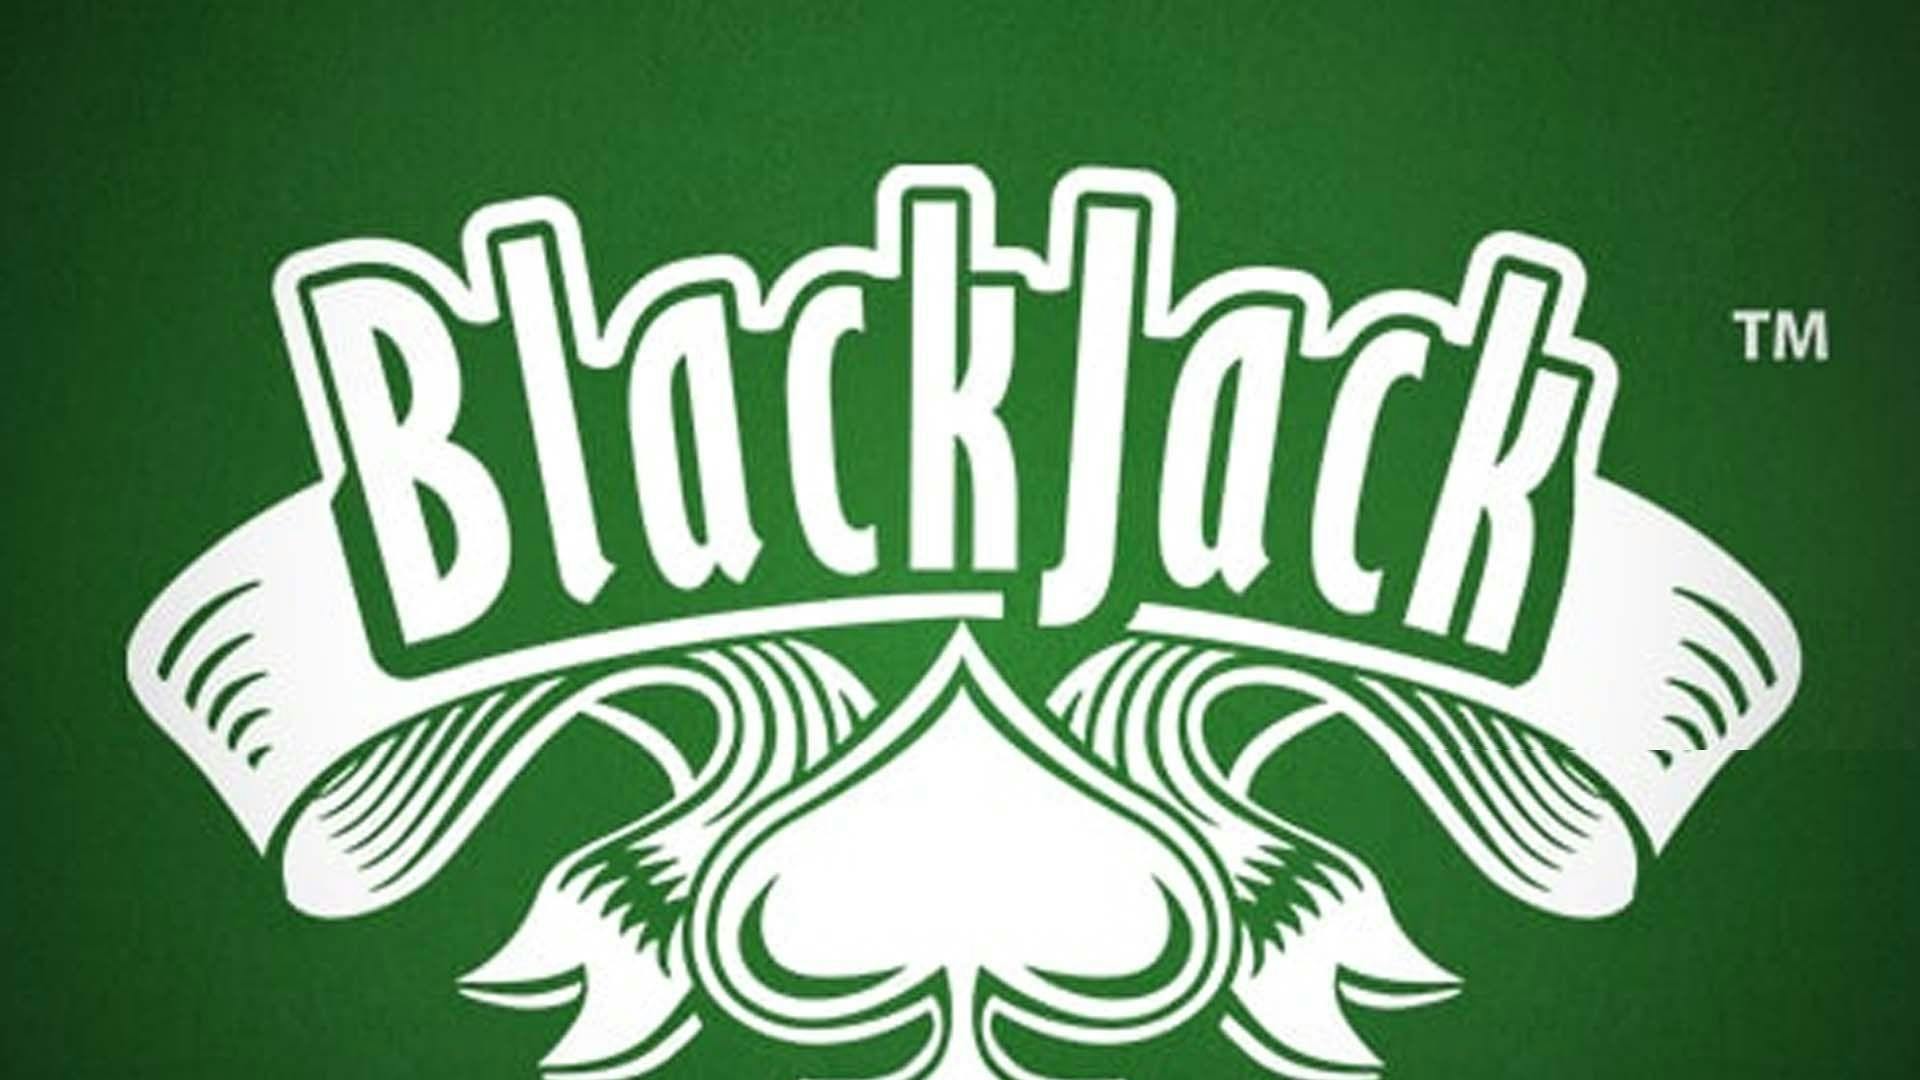 Classic Blackjack Table Games Free Online Play